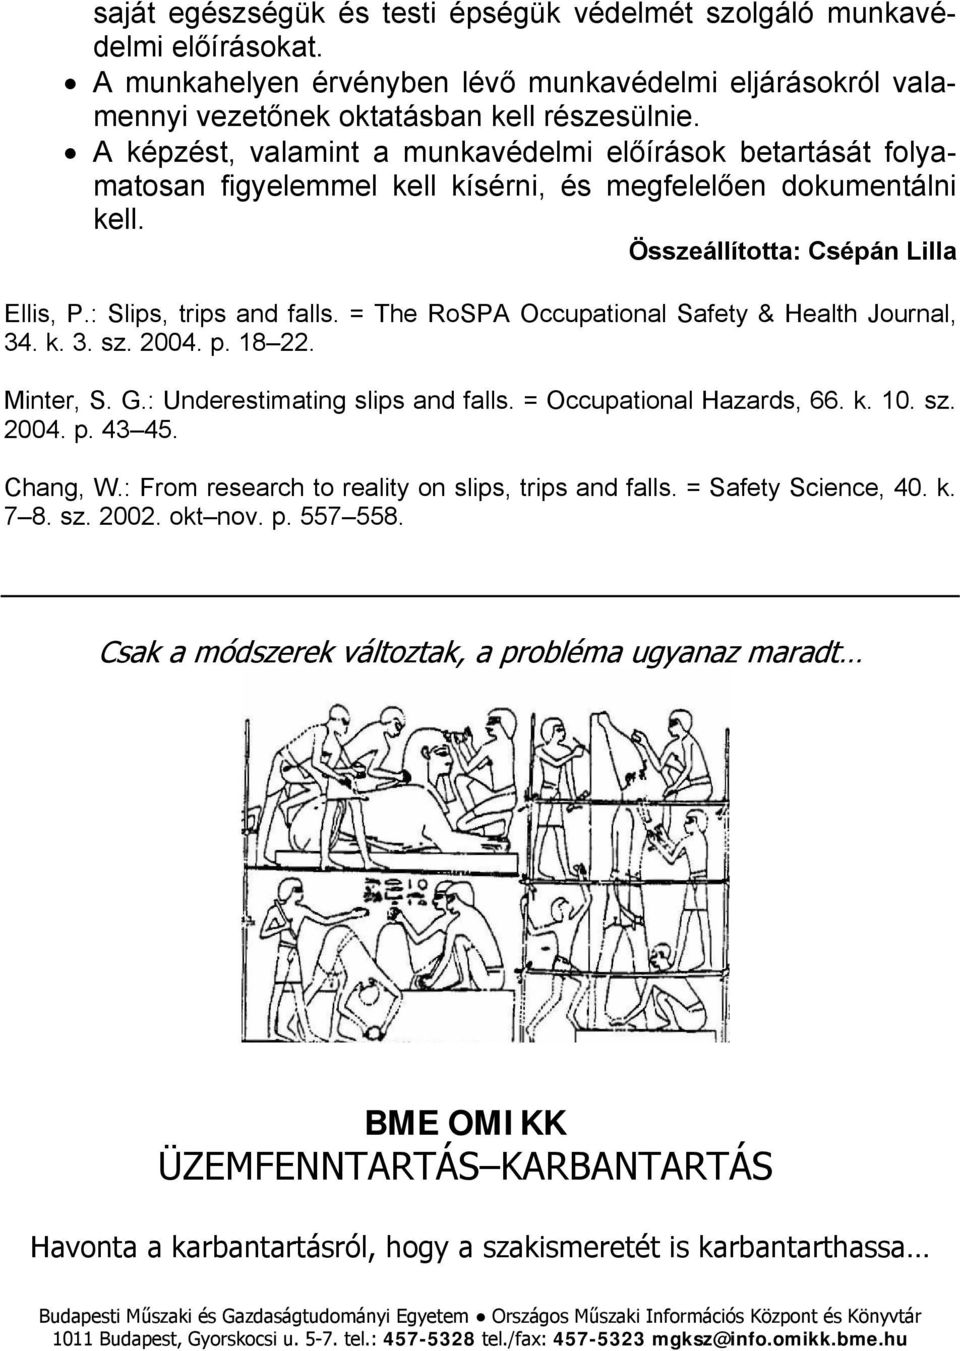 = The RoSPA Occupational Safety & Health Journal, 34. k. 3. sz. 2004. p. 18 22. Minter, S. G.: Underestimating slips and falls. = Occupational Hazards, 66. k. 10. sz. 2004. p. 43 45. Chang, W.